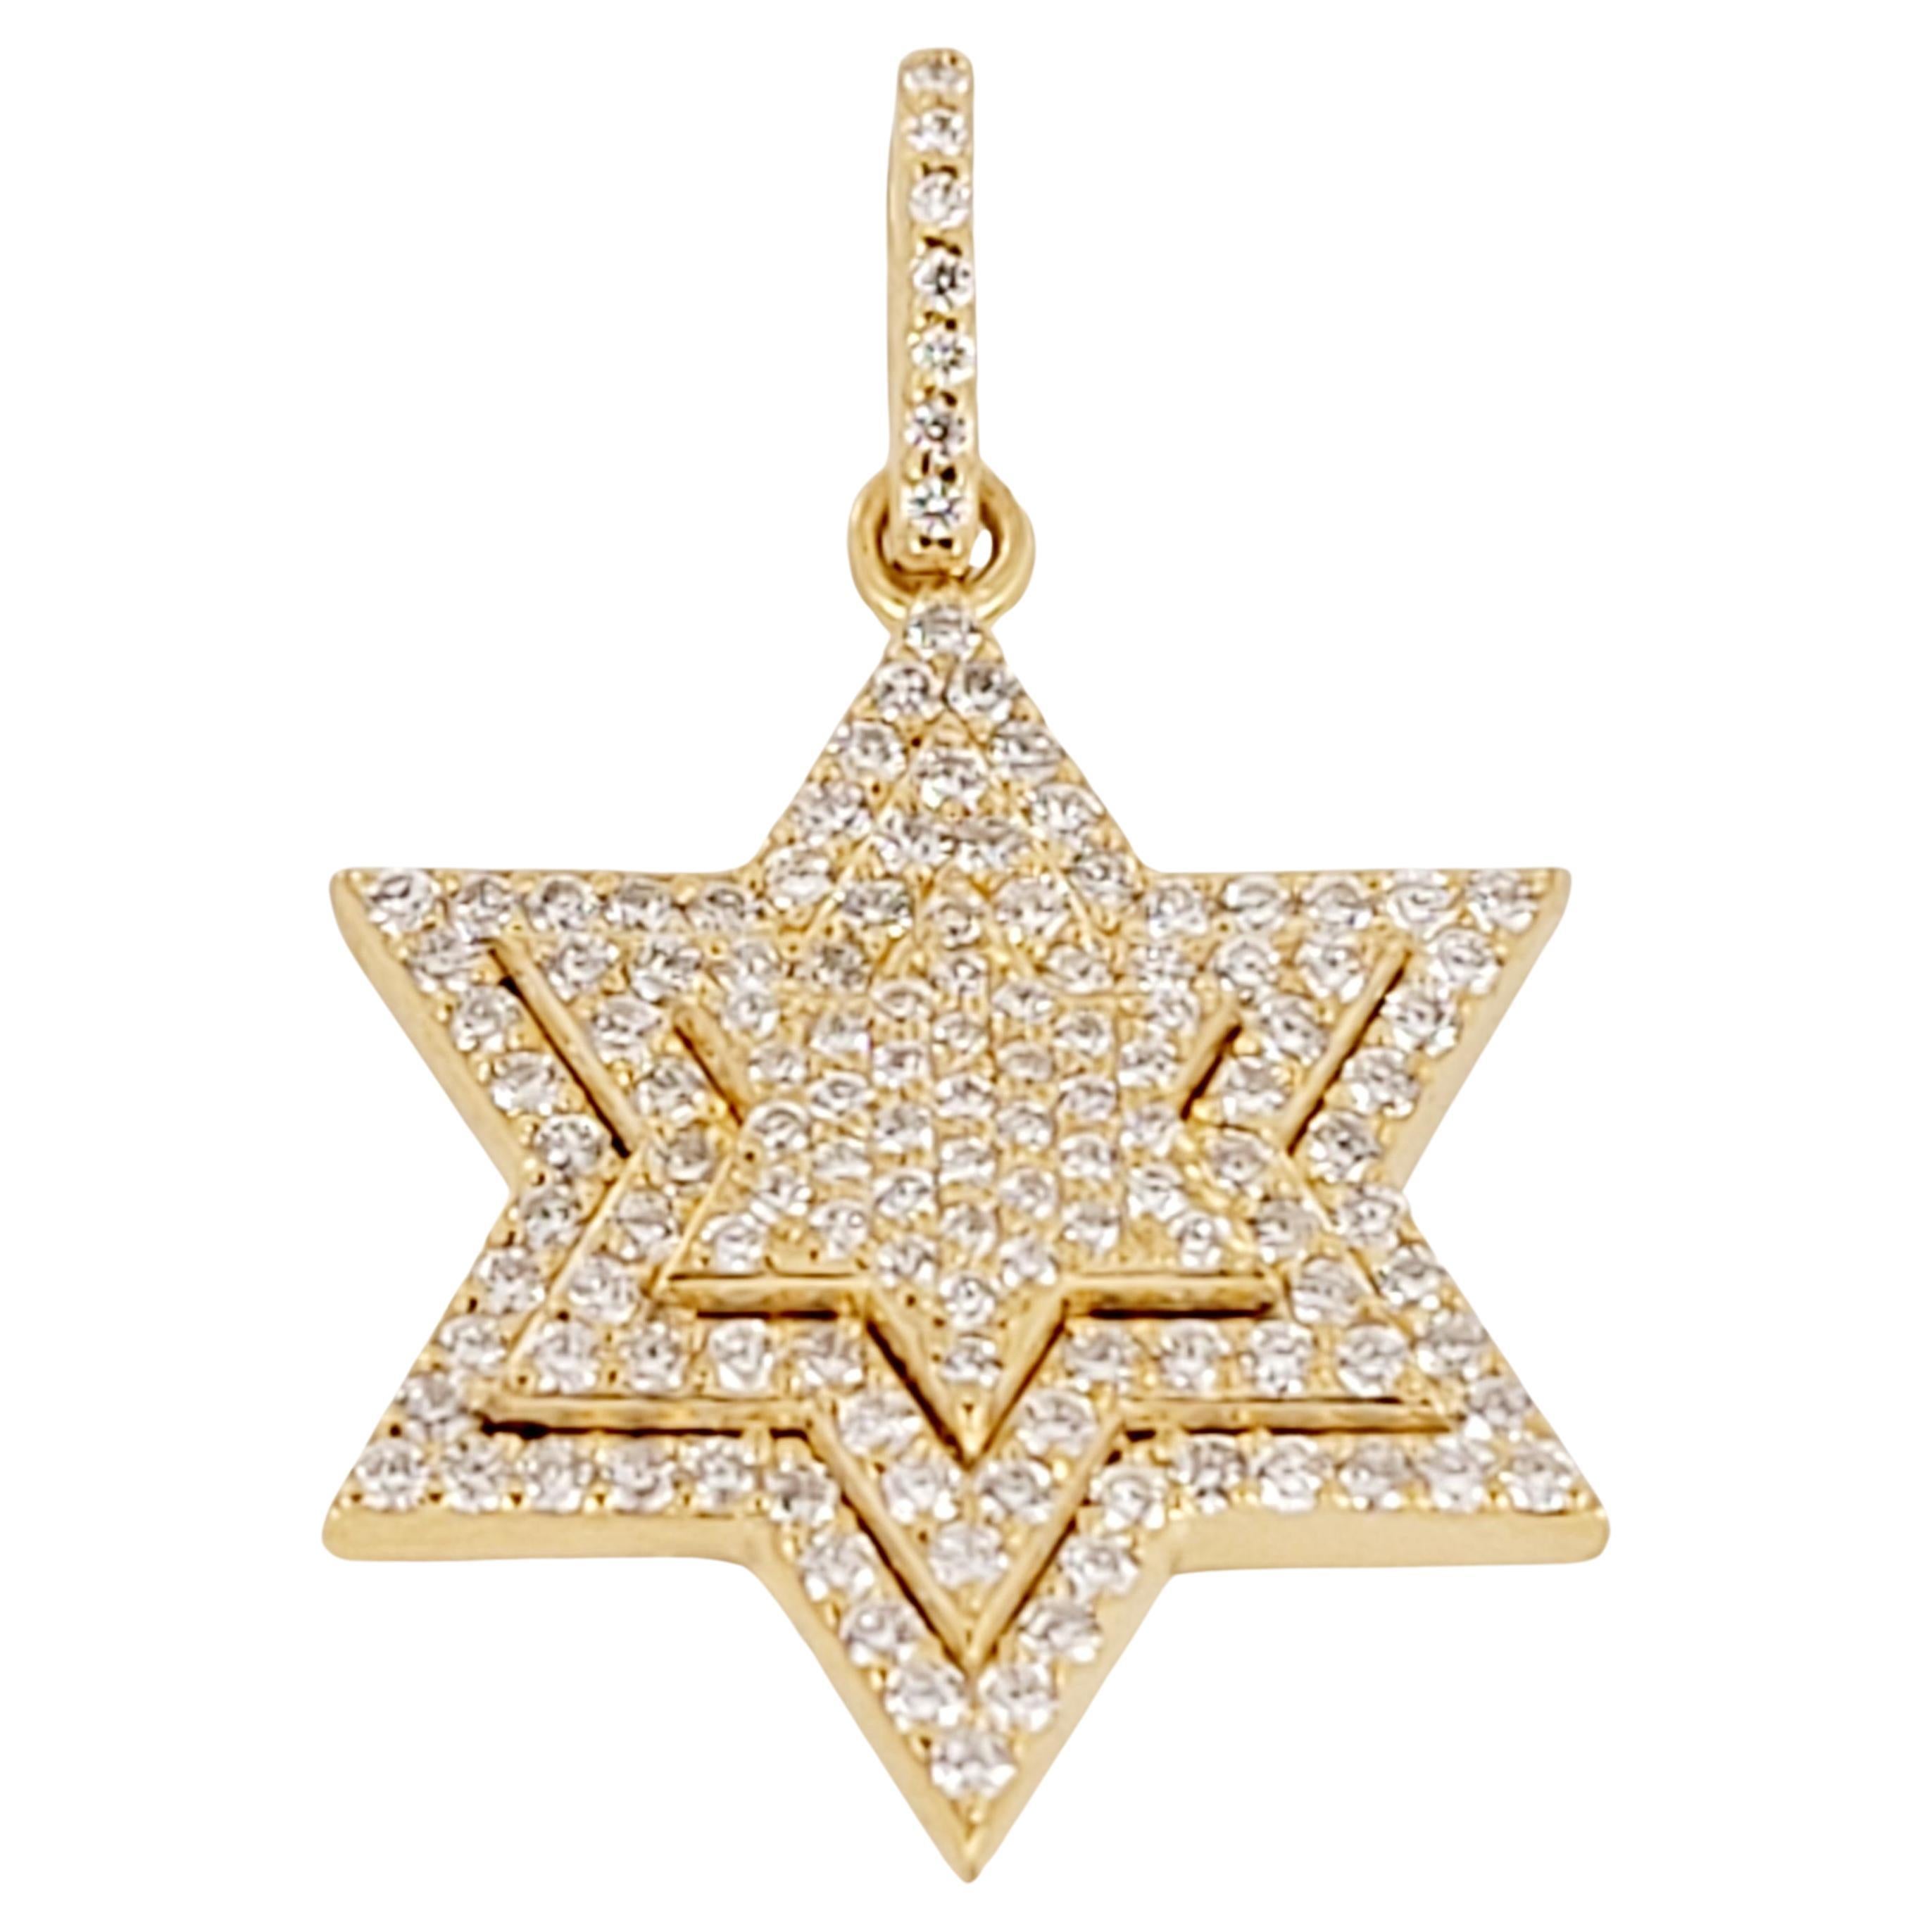 Star Shape Pendant in14K Yellow Gold with Diamonds